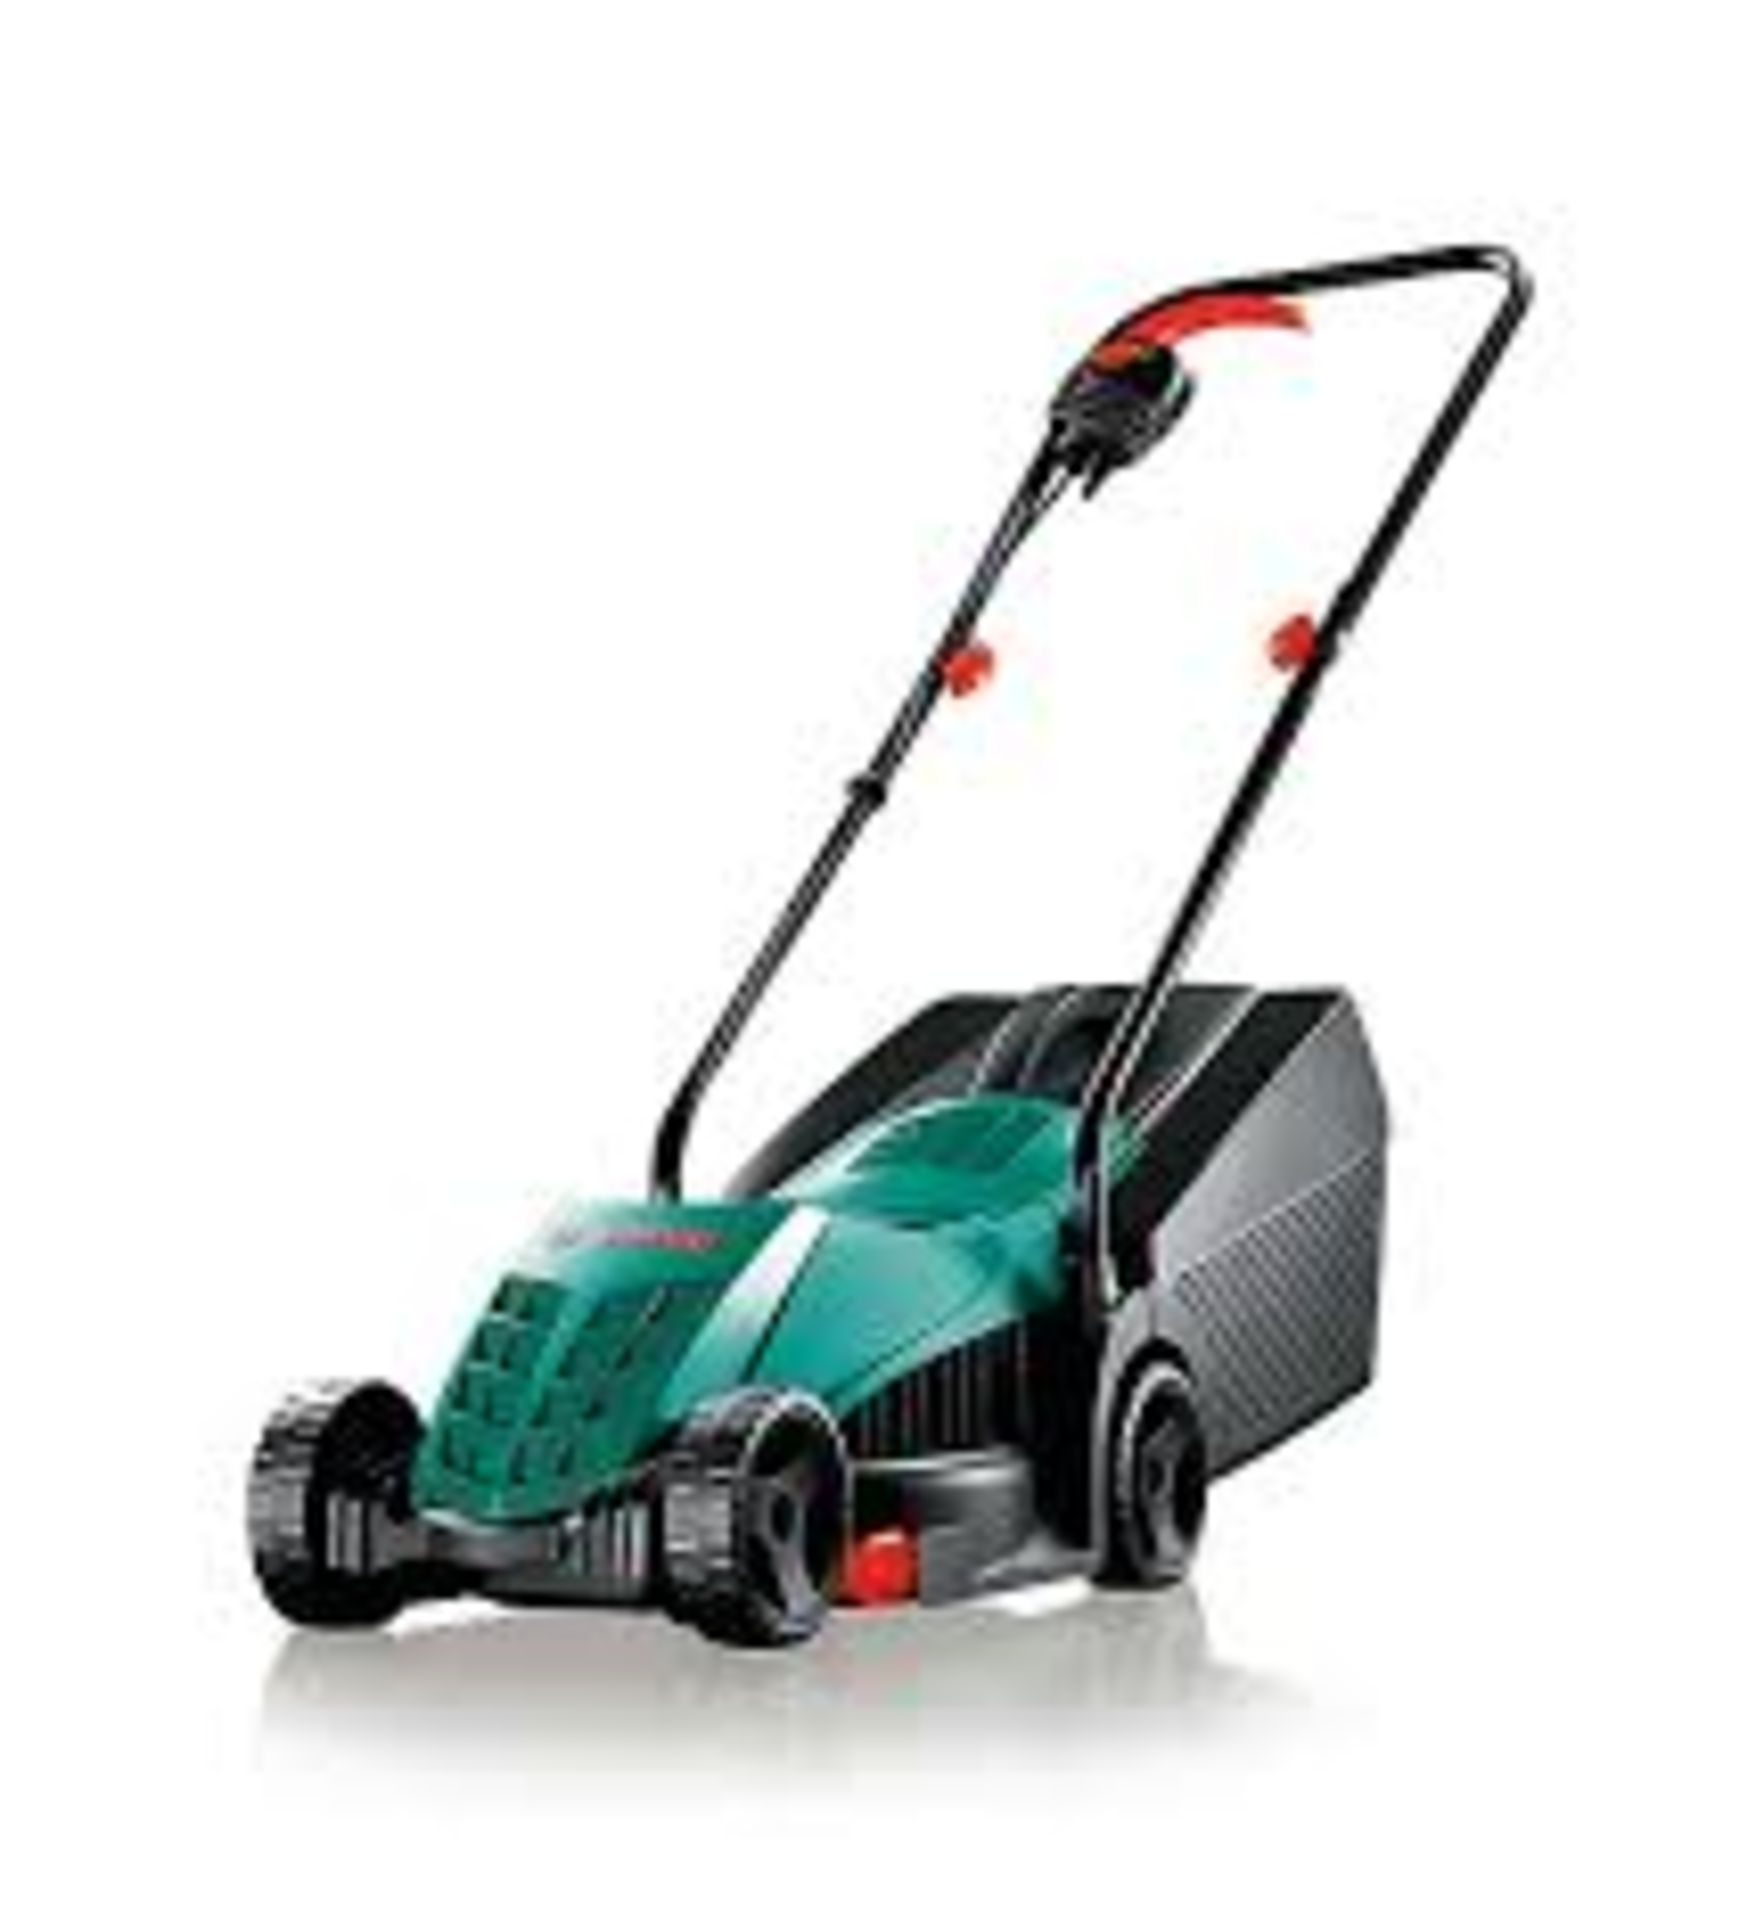 Bosch Rotak 32R Electric Rotary Lawnmower. - P4. Lightweight and compact lawn mower that cuts